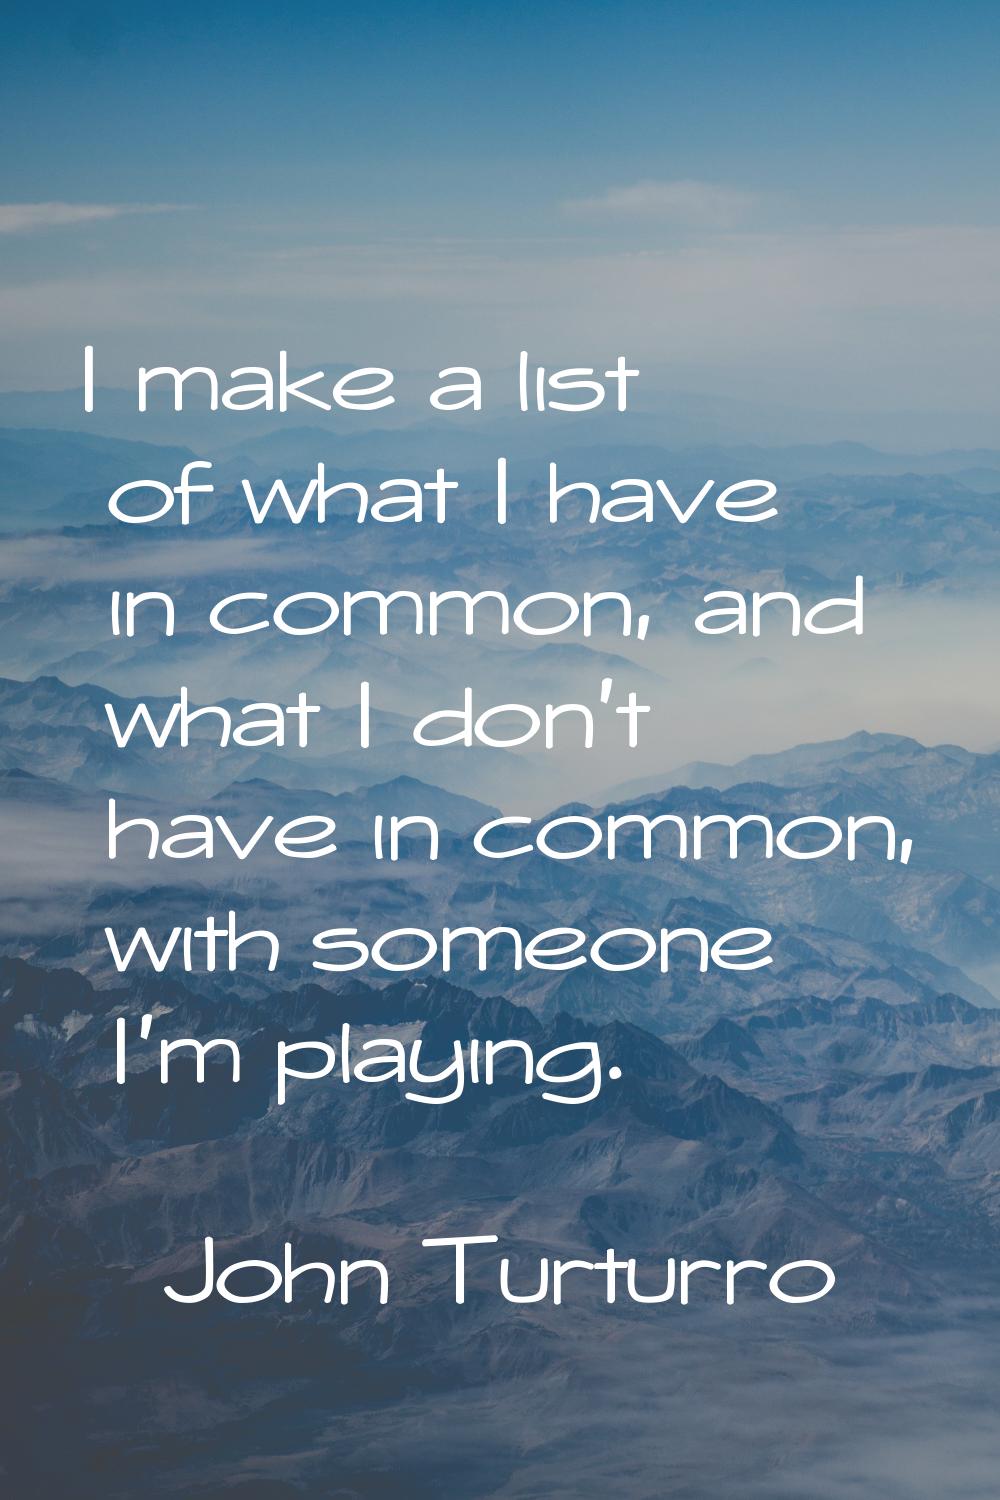 I make a list of what I have in common, and what I don't have in common, with someone I'm playing.